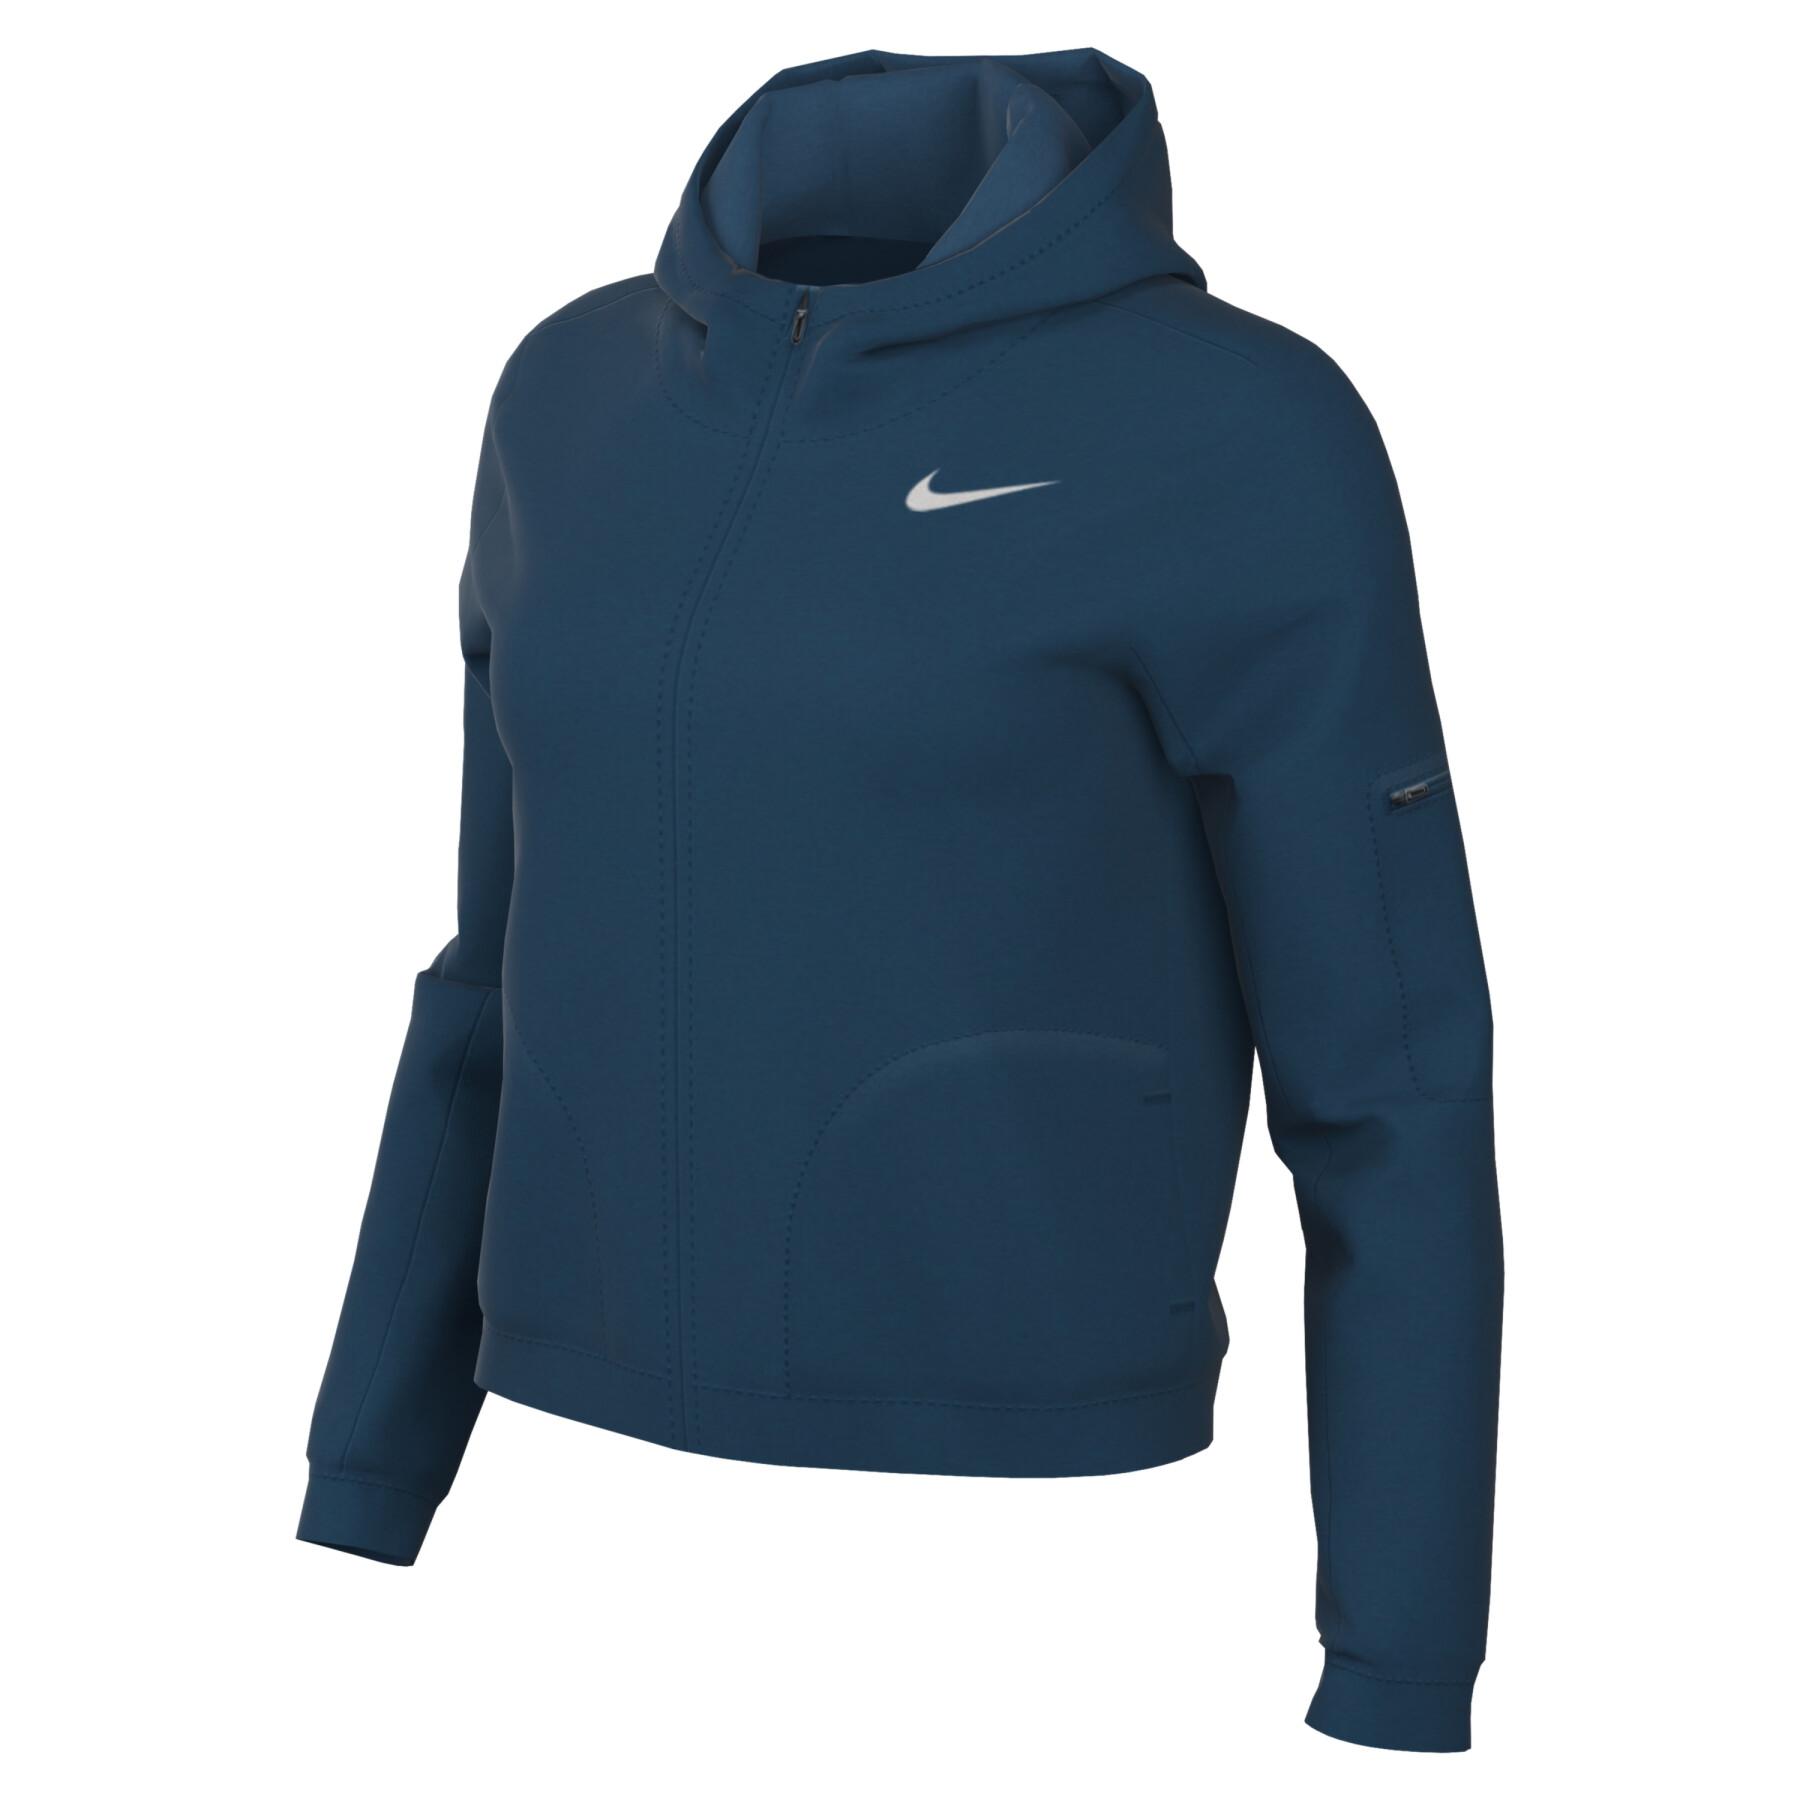 Chaqueta impermeable para mujer Nike Impossibly Light